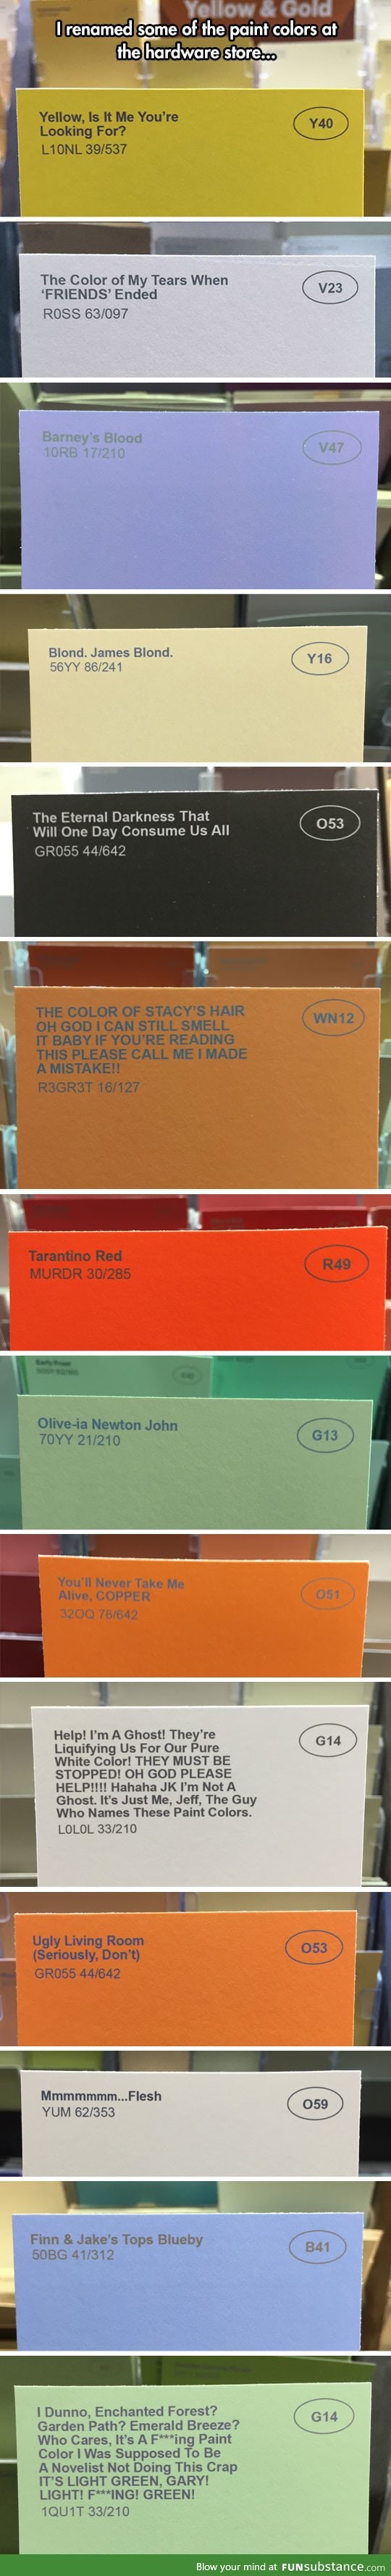 The greatest color names in the world